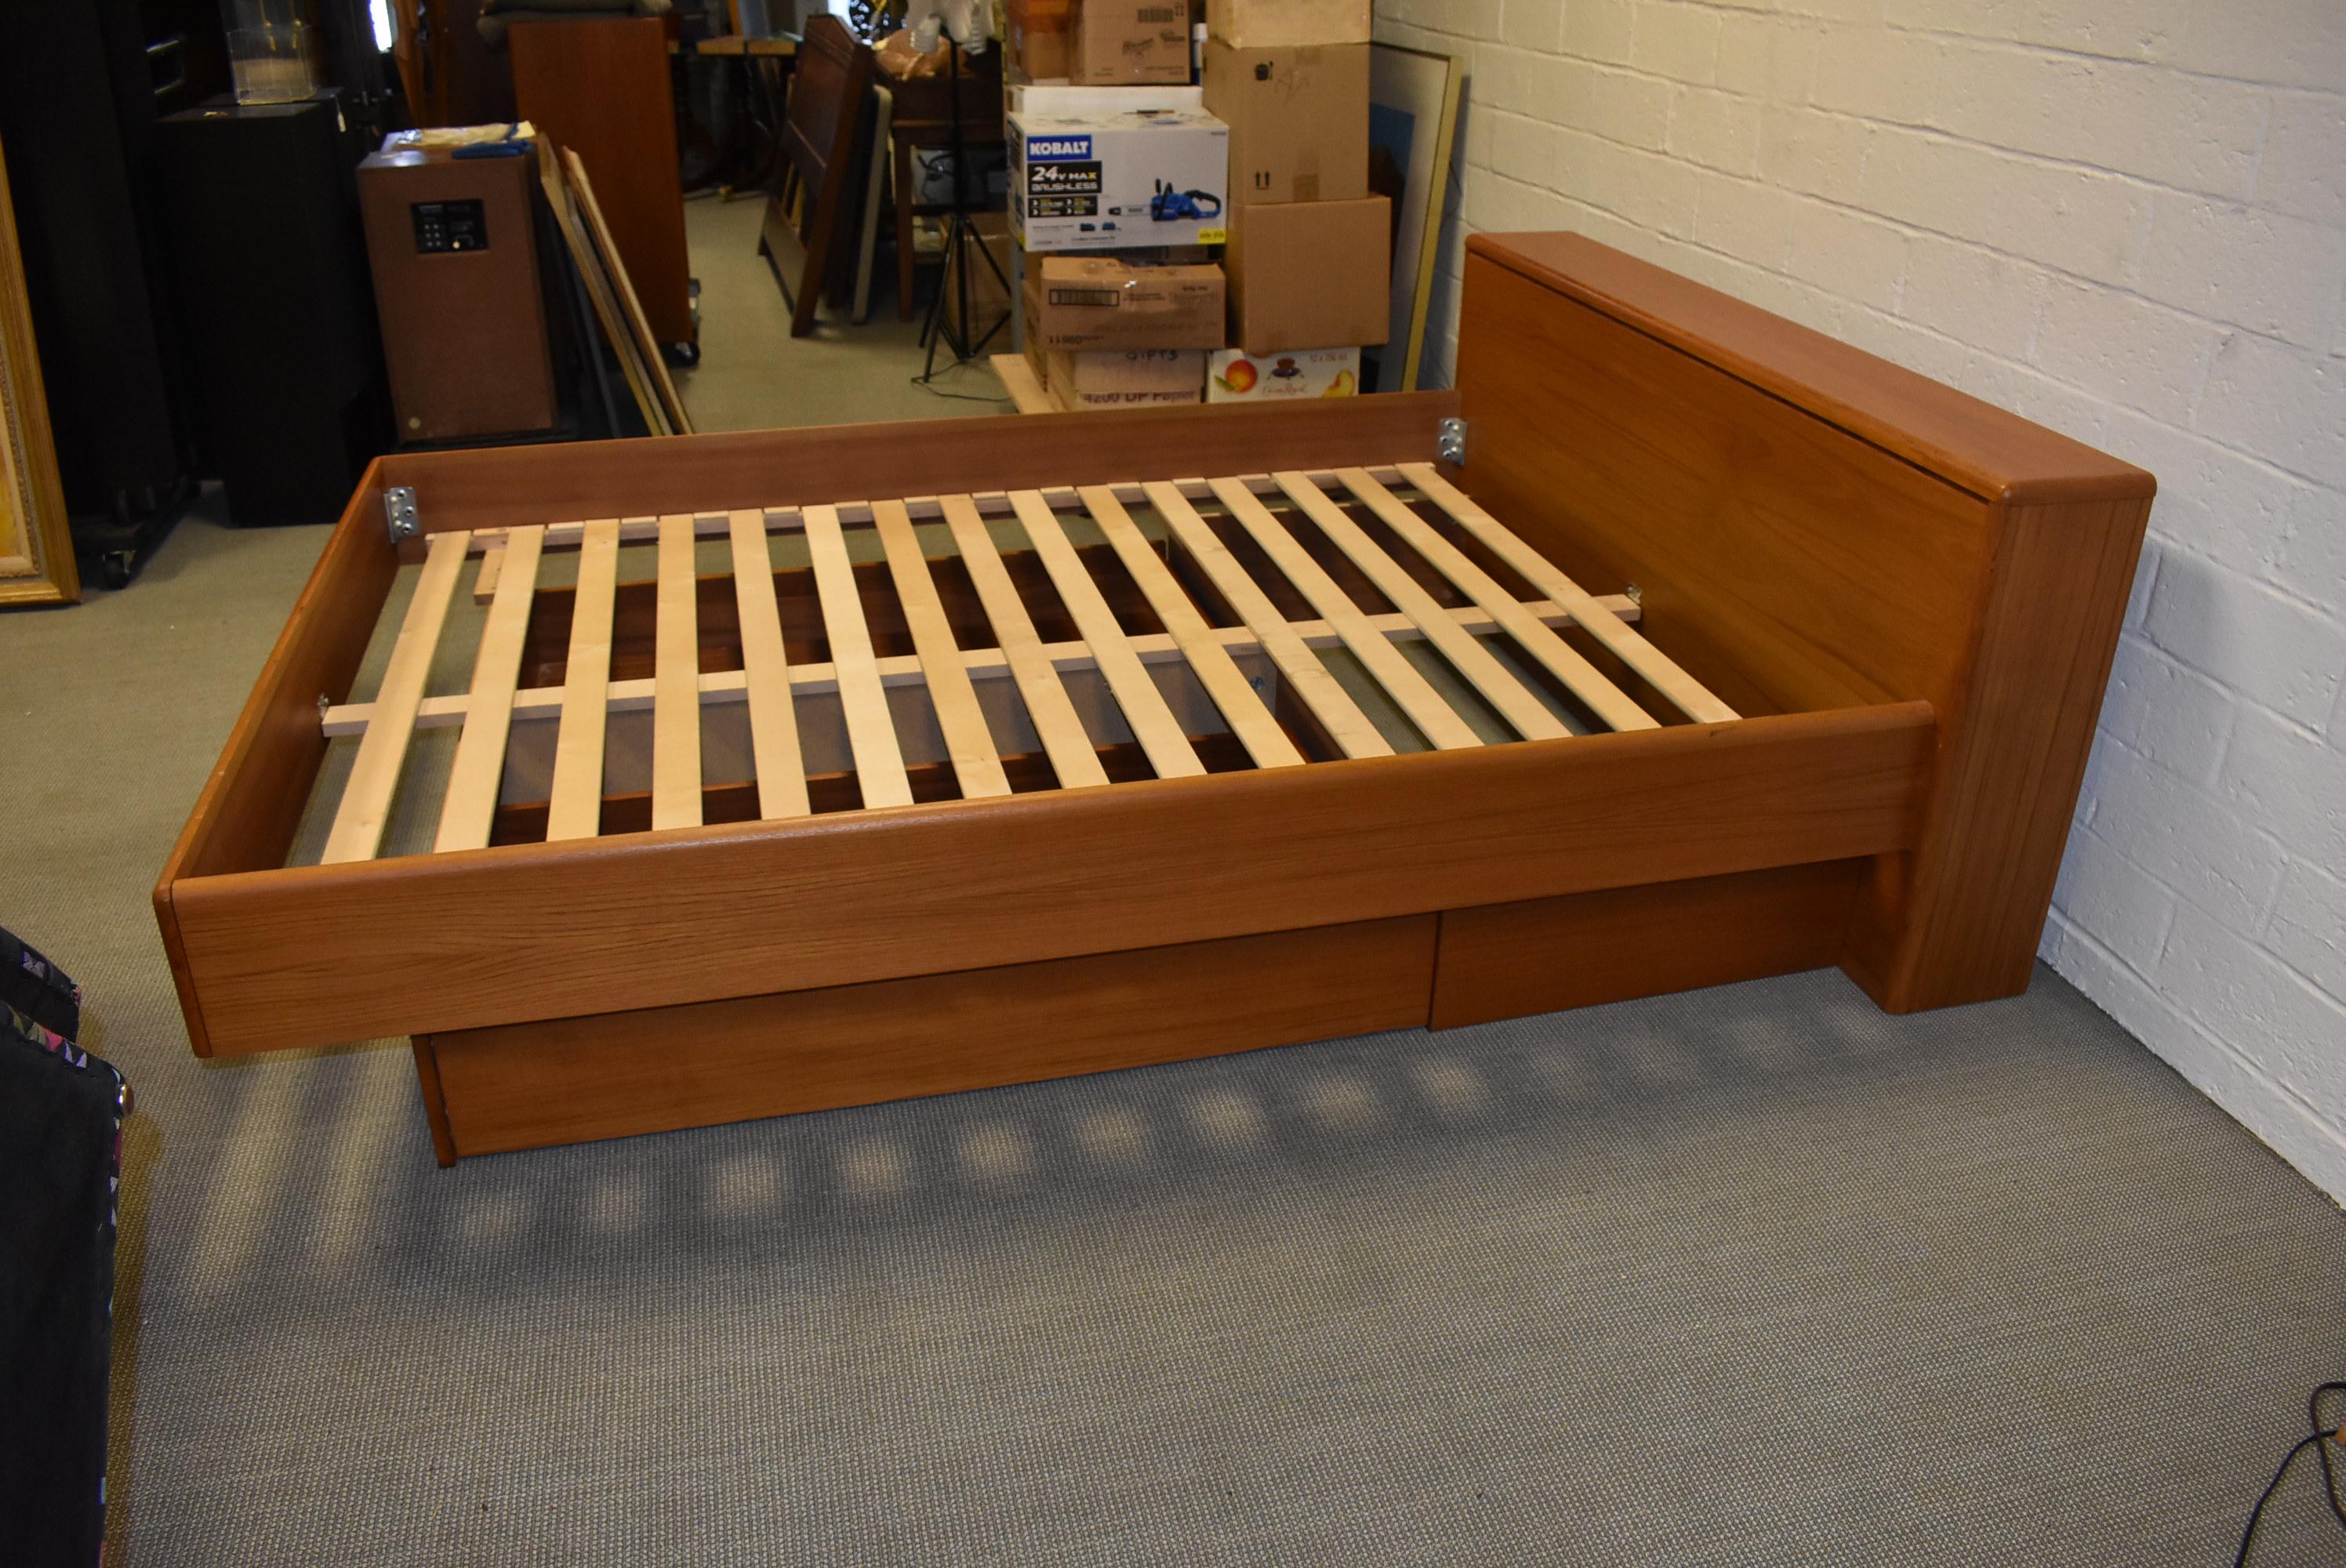 This queen teak platform bed is complete with large under drawers for storage. The headboard is hinged for extra storage as well. The bed overall measures 65.5